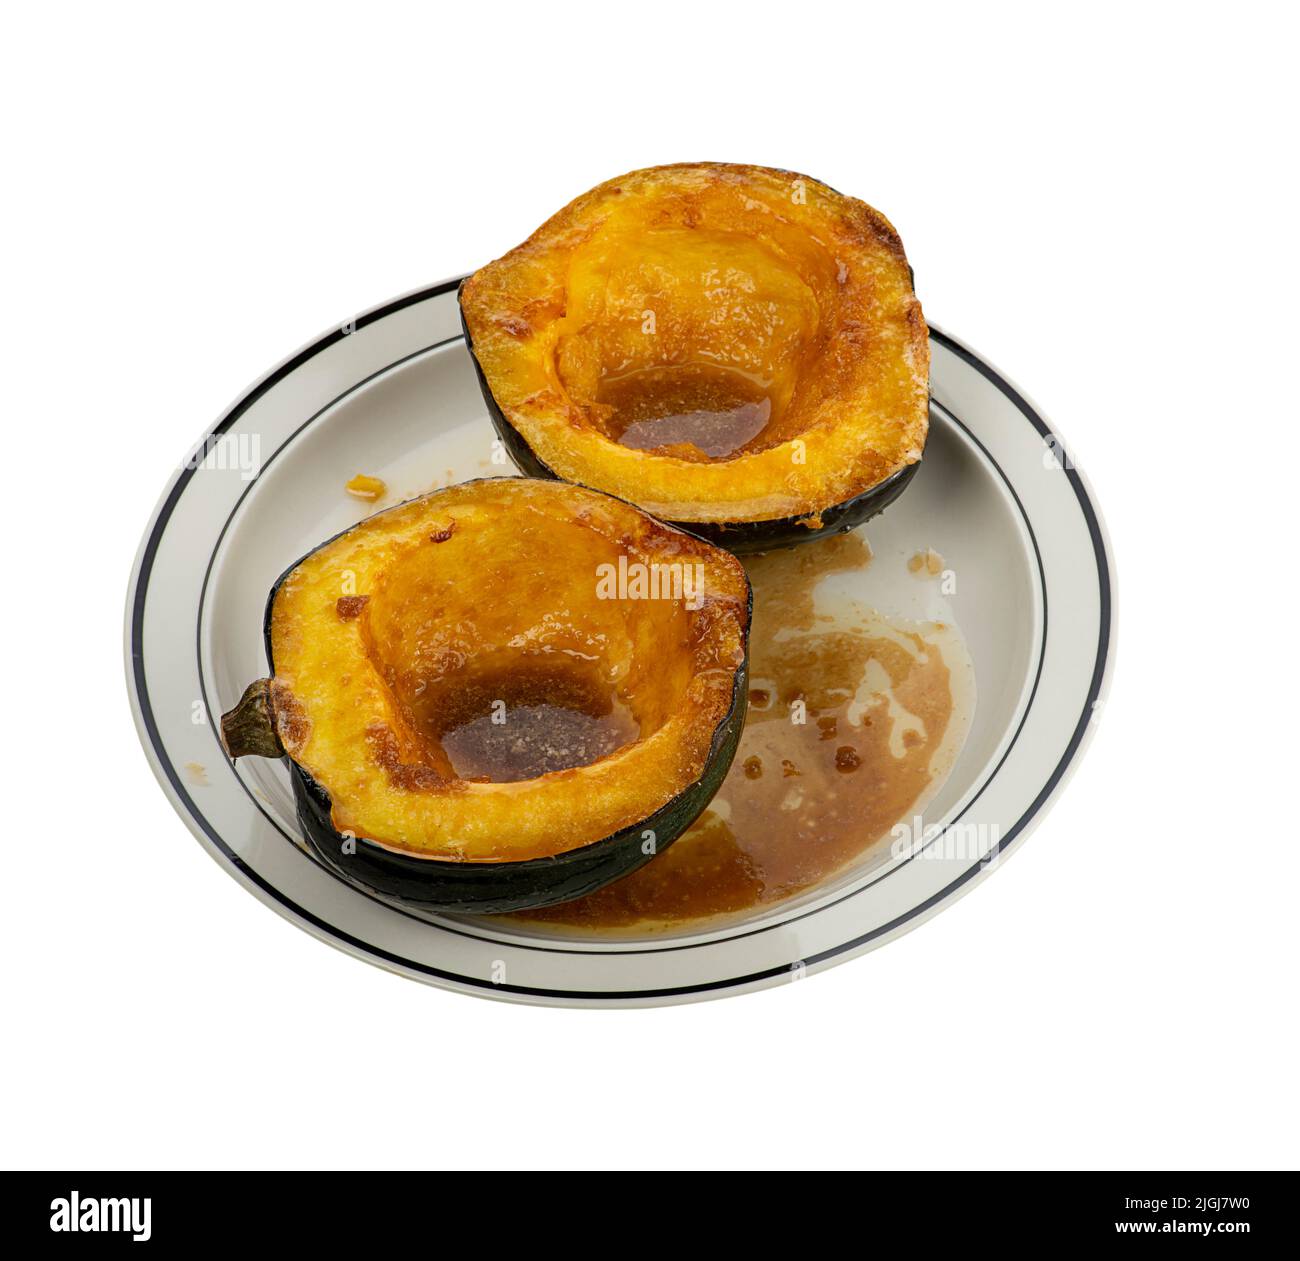 Acorn Squash Cooked With Brown Sugar And Butter in a Plate, Isolated on White Background Stock Photo